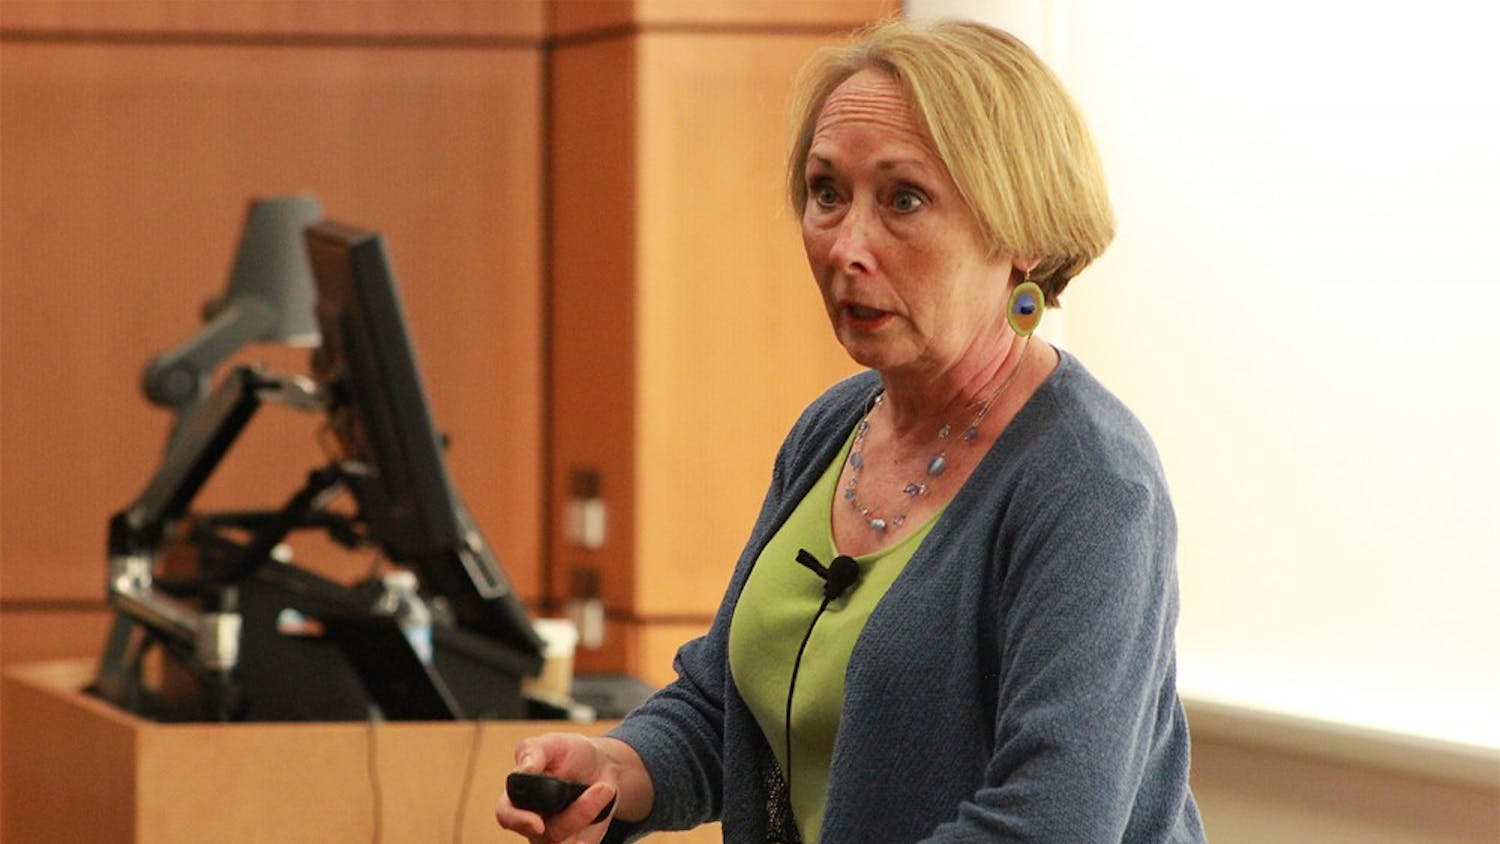 Dr. Valerie Young gave a talk thursday evening in Koury Oral Health Sciences Building on Imposter Syndrome. On encouraging students to break out of their personal imposter experience, Dr. Young said "Everyone loses when bright people play small."